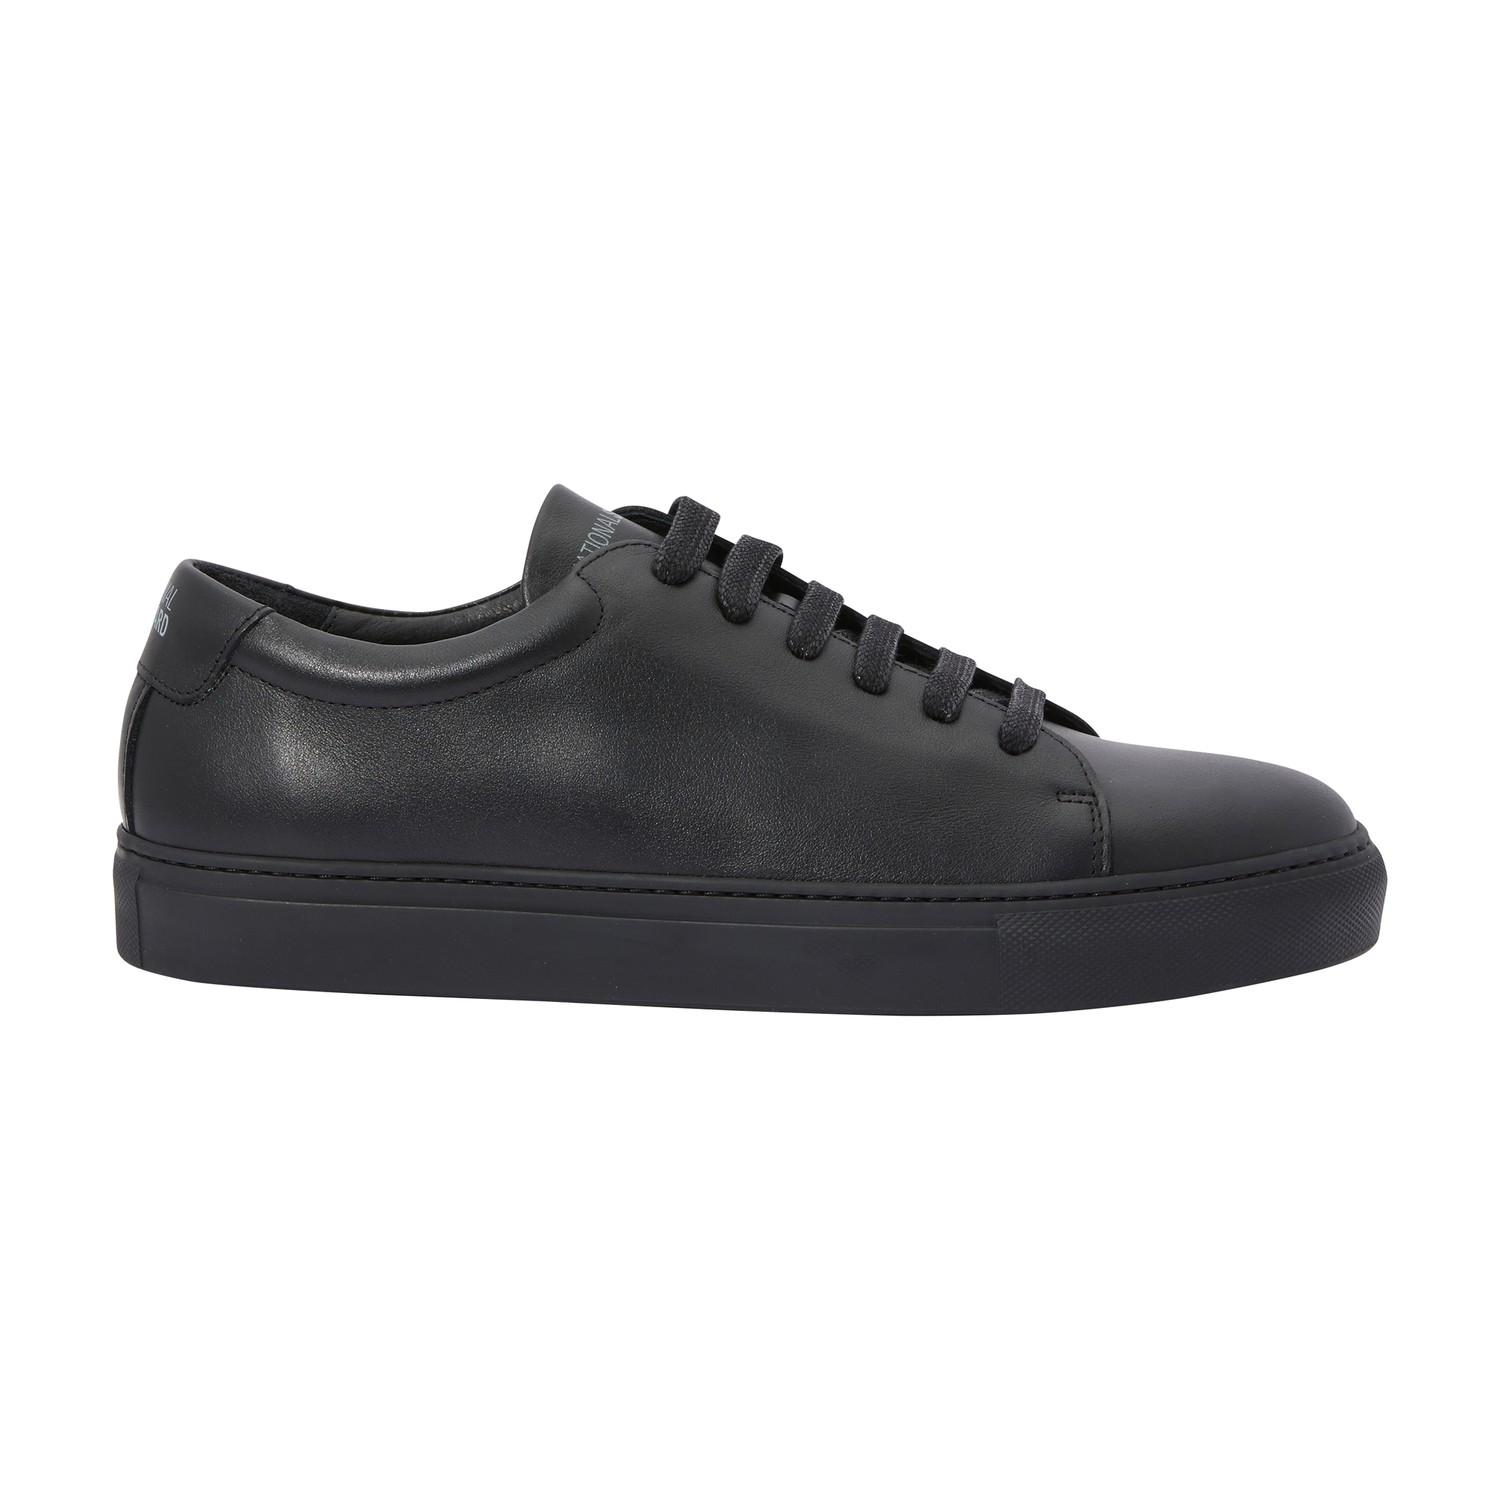 National Standard Edition 3 Trainers in Black for Men - Lyst